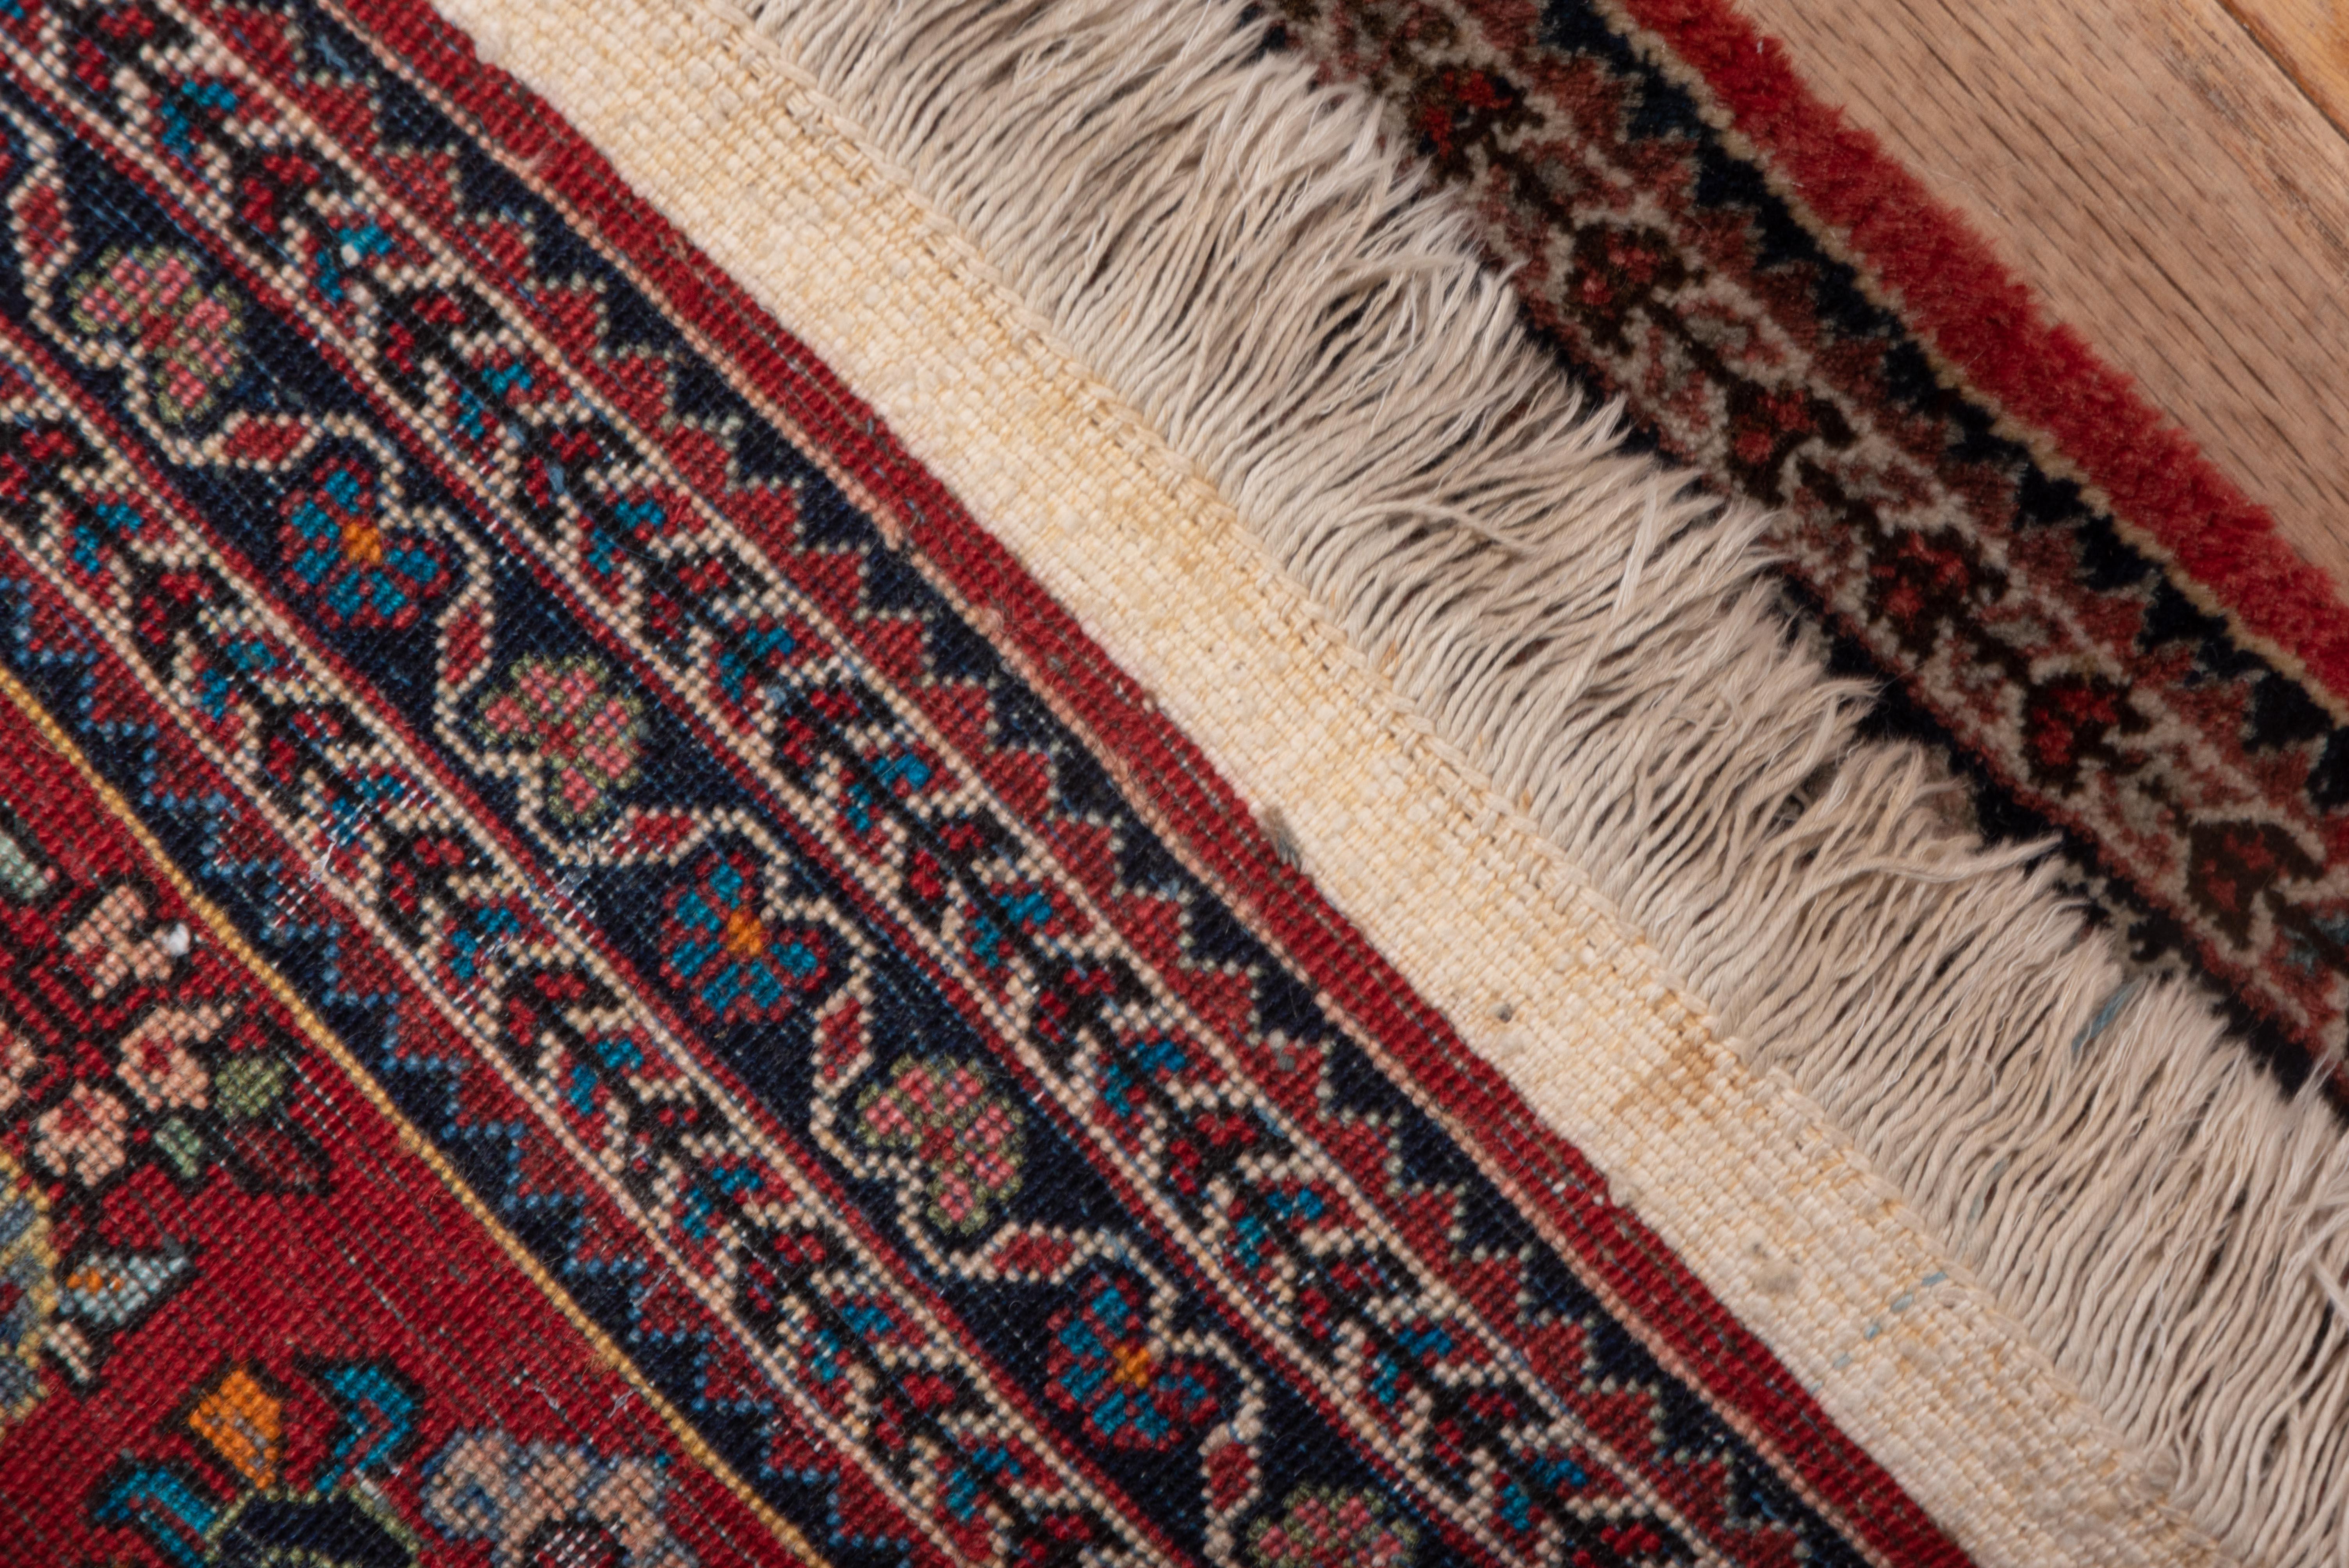 Sarouk Rug in Formal, Traditional Persian Style - Bright Red with Florets In Good Condition For Sale In New York, NY